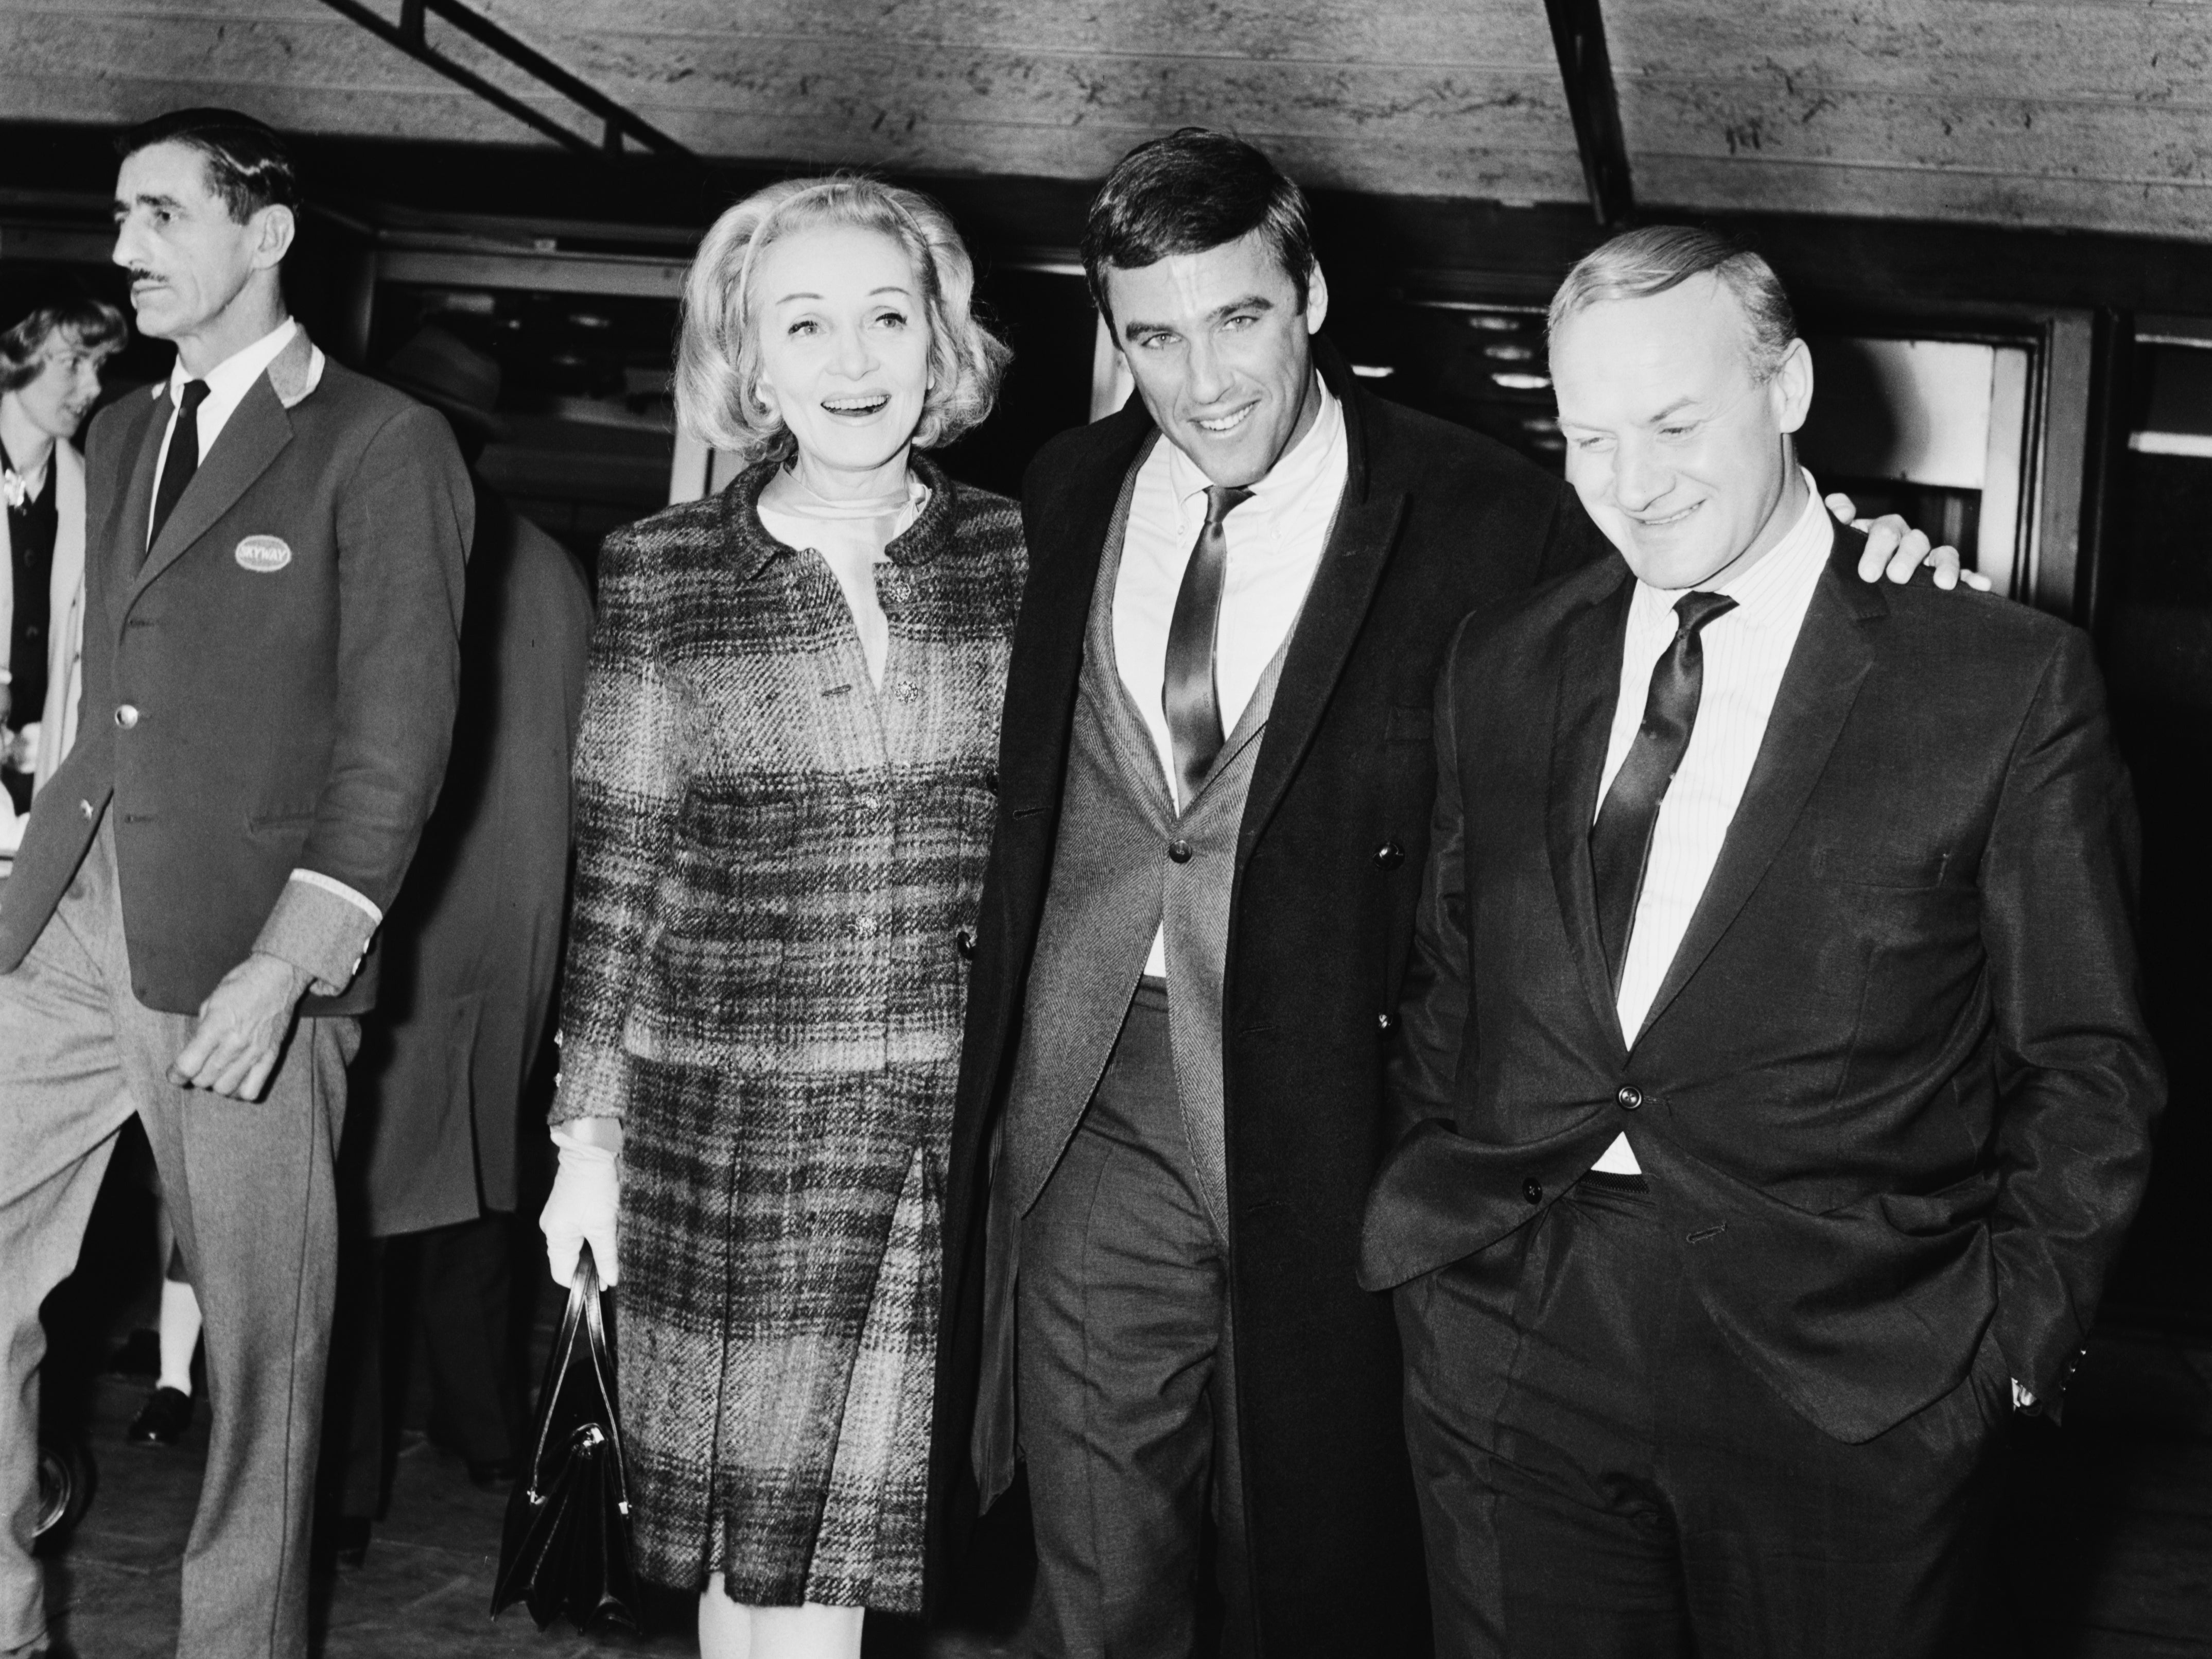 The composer with Marlene Dietrich (left) in 1964